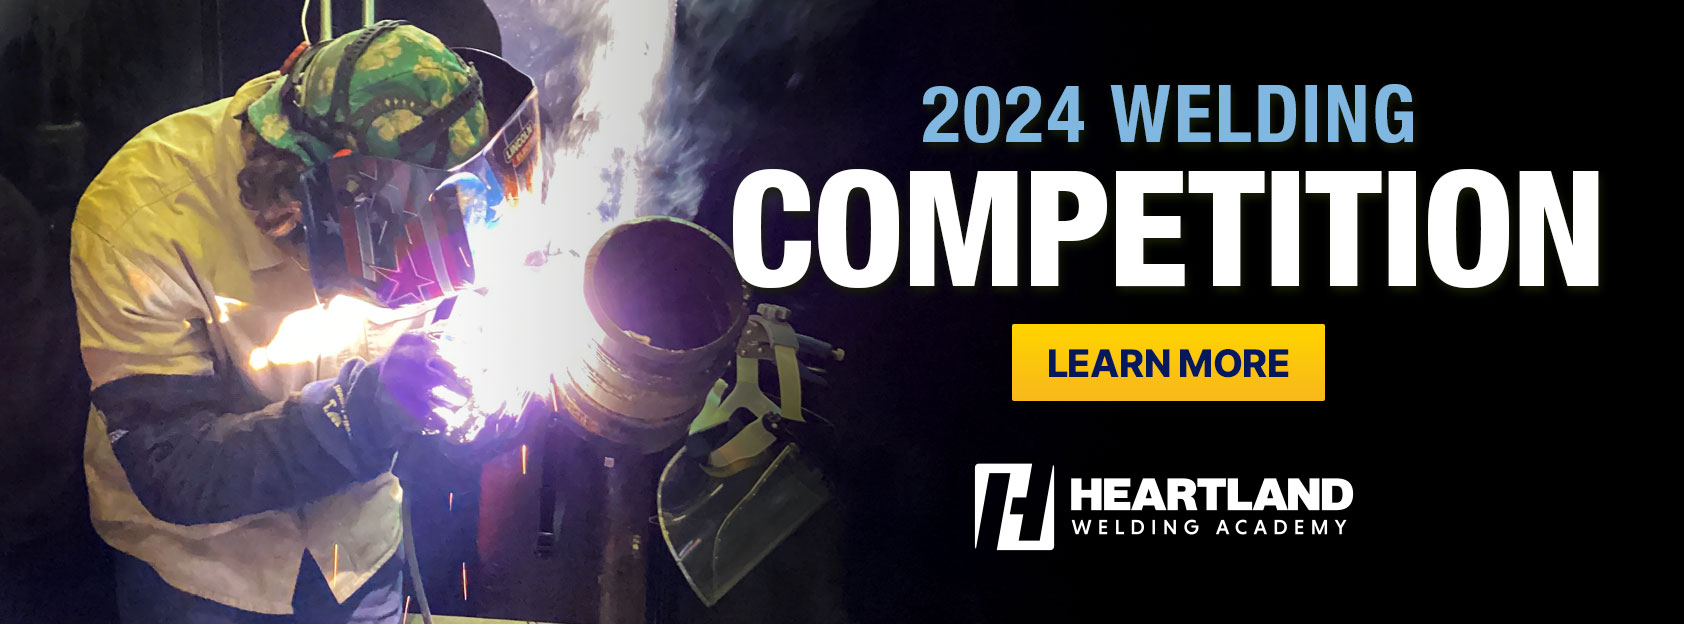 2024 Welding Competition